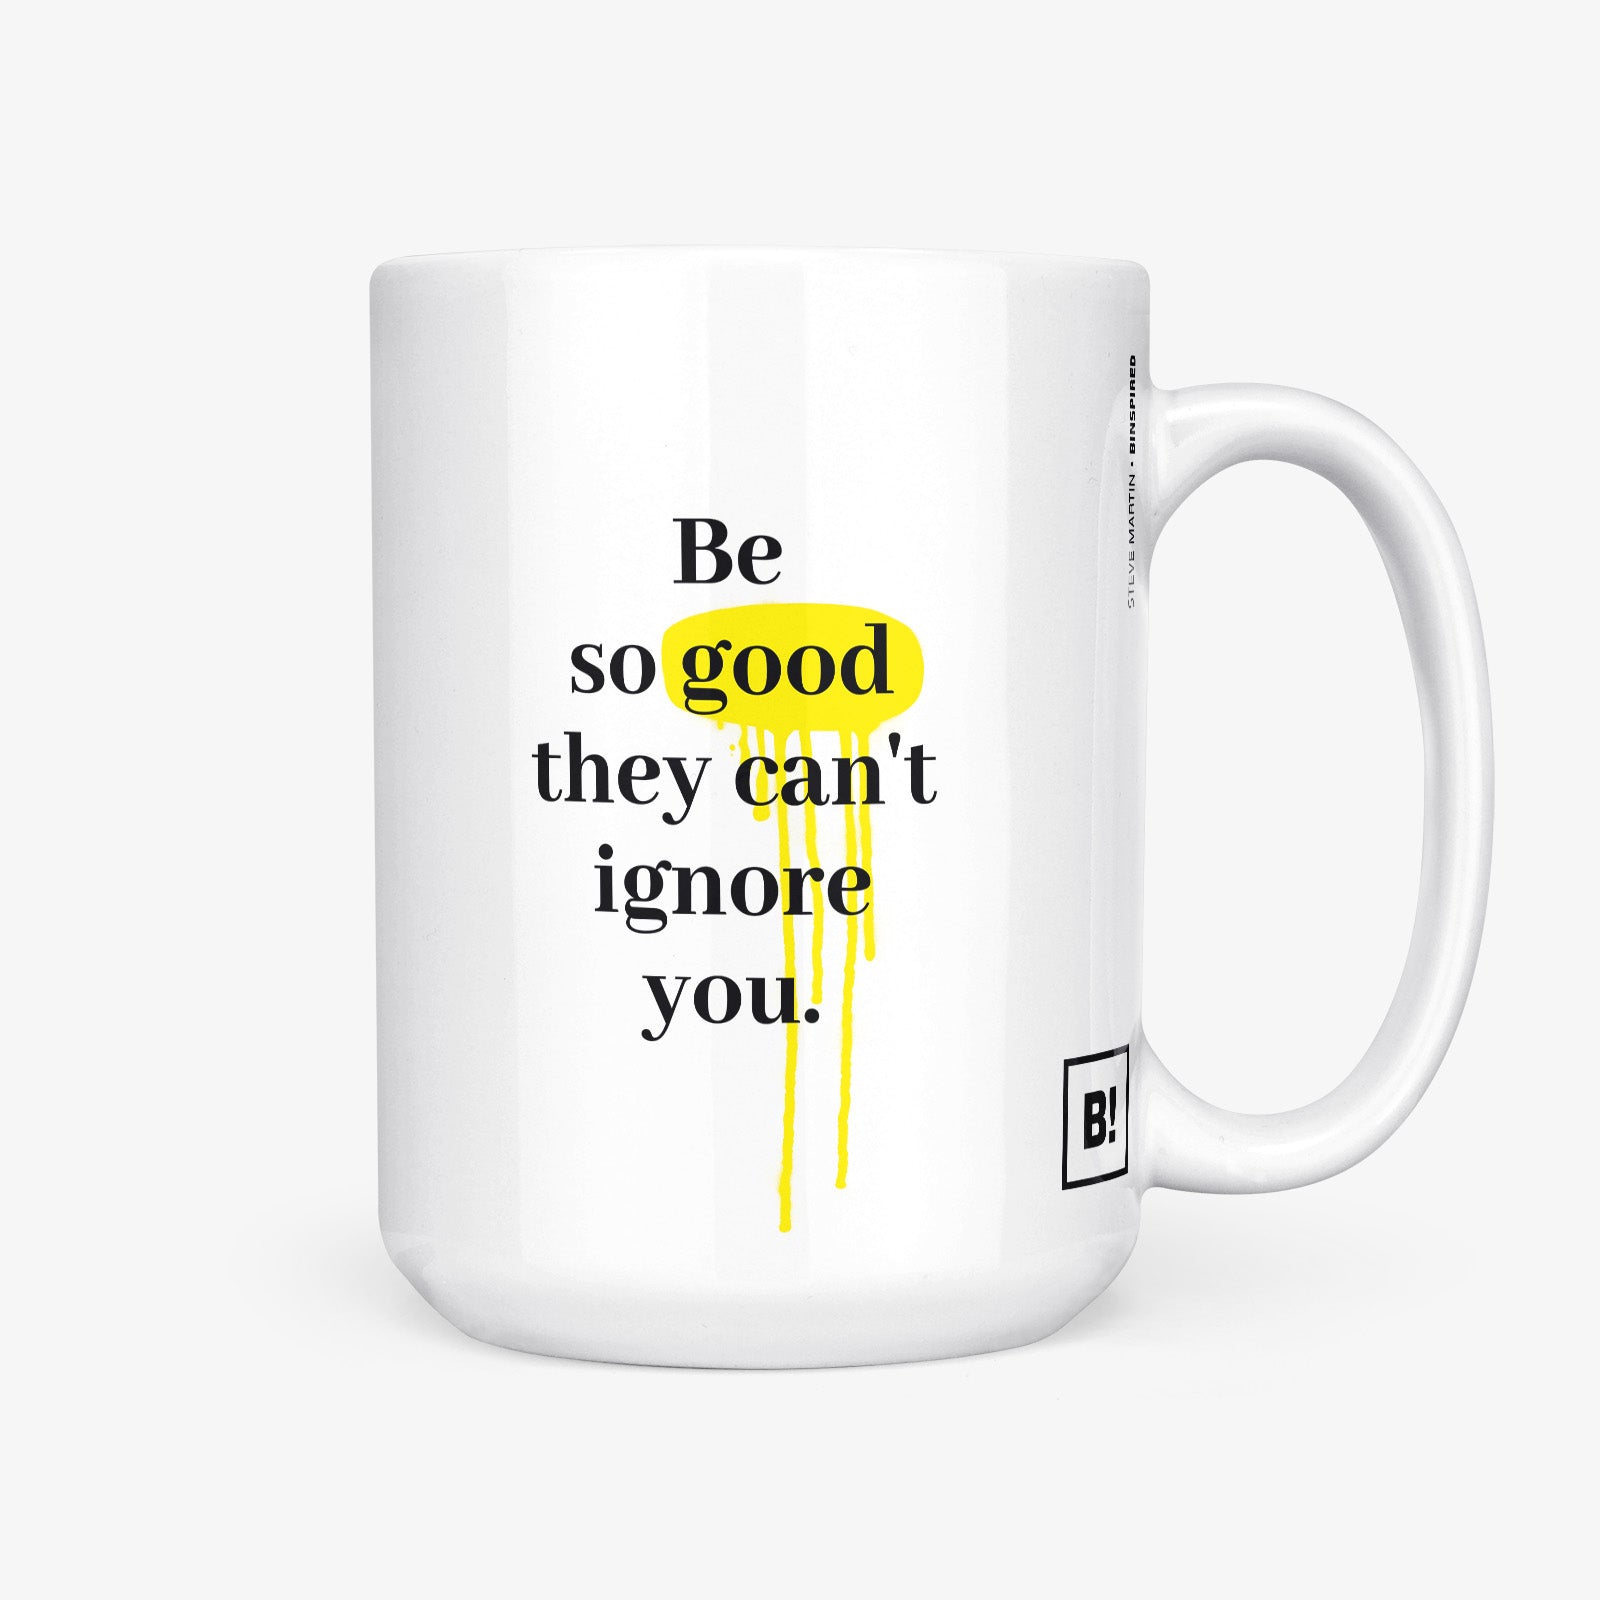 Be inspired by Steve Martin's famous quote, "Be so good they can't ignore you" on this white and glossy 15oz coffee mug with the handle on the right.